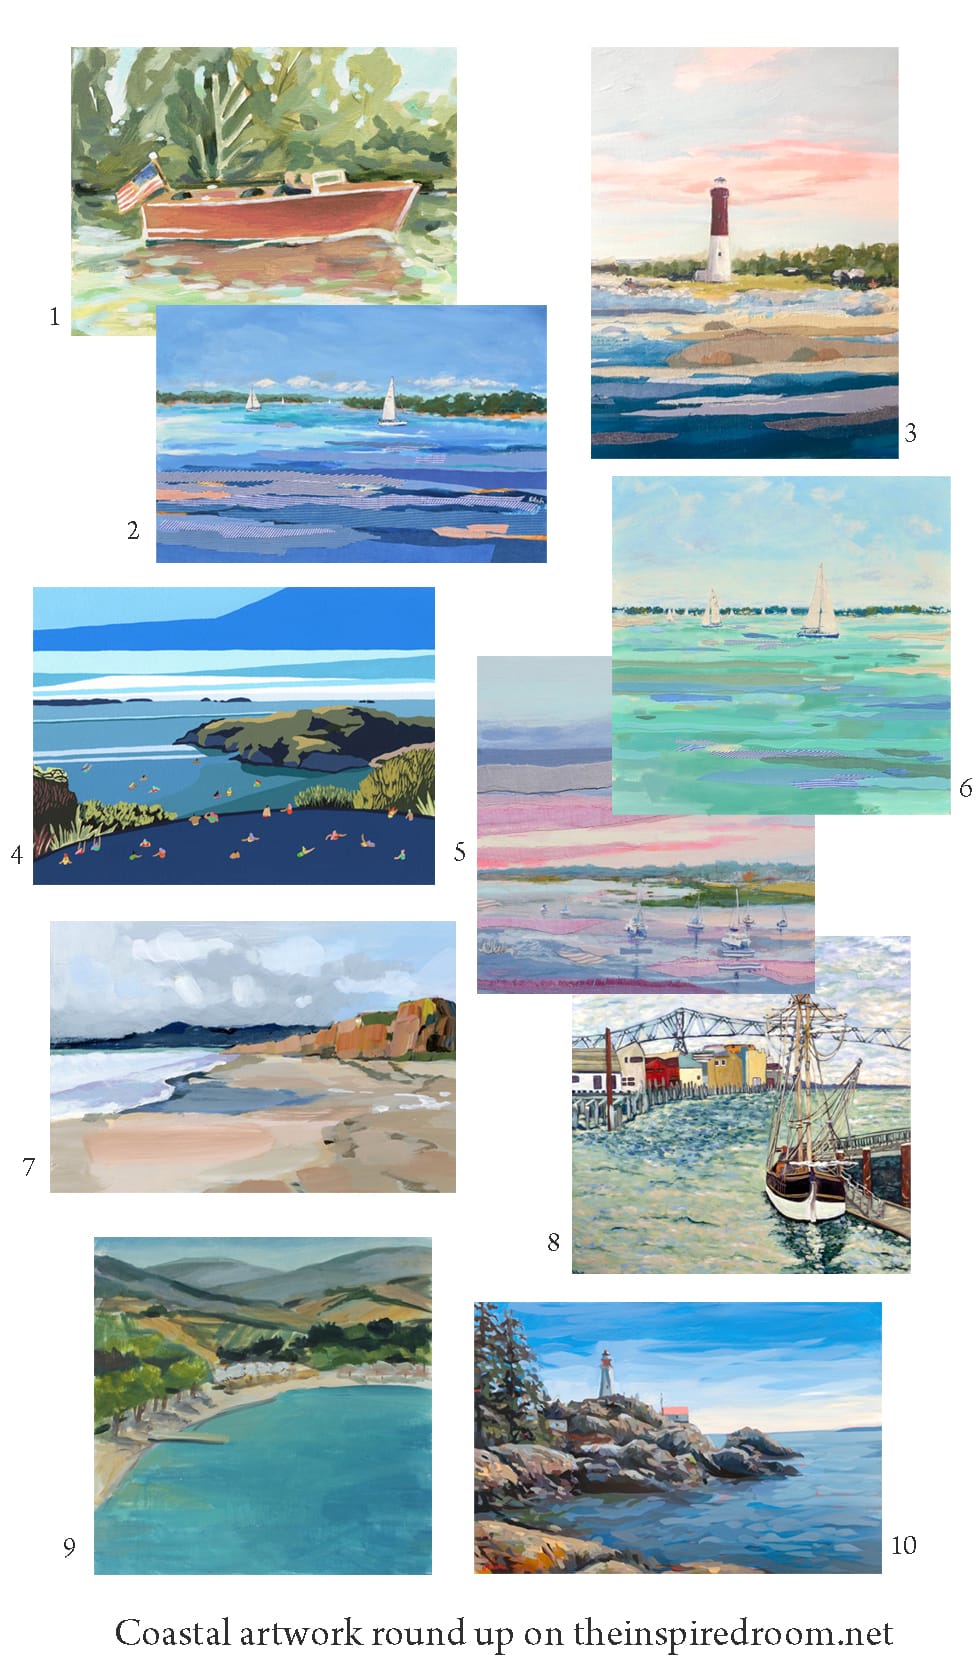 Where to Find Coastal Art / Sailboats / Ocean View: Favorite Resources